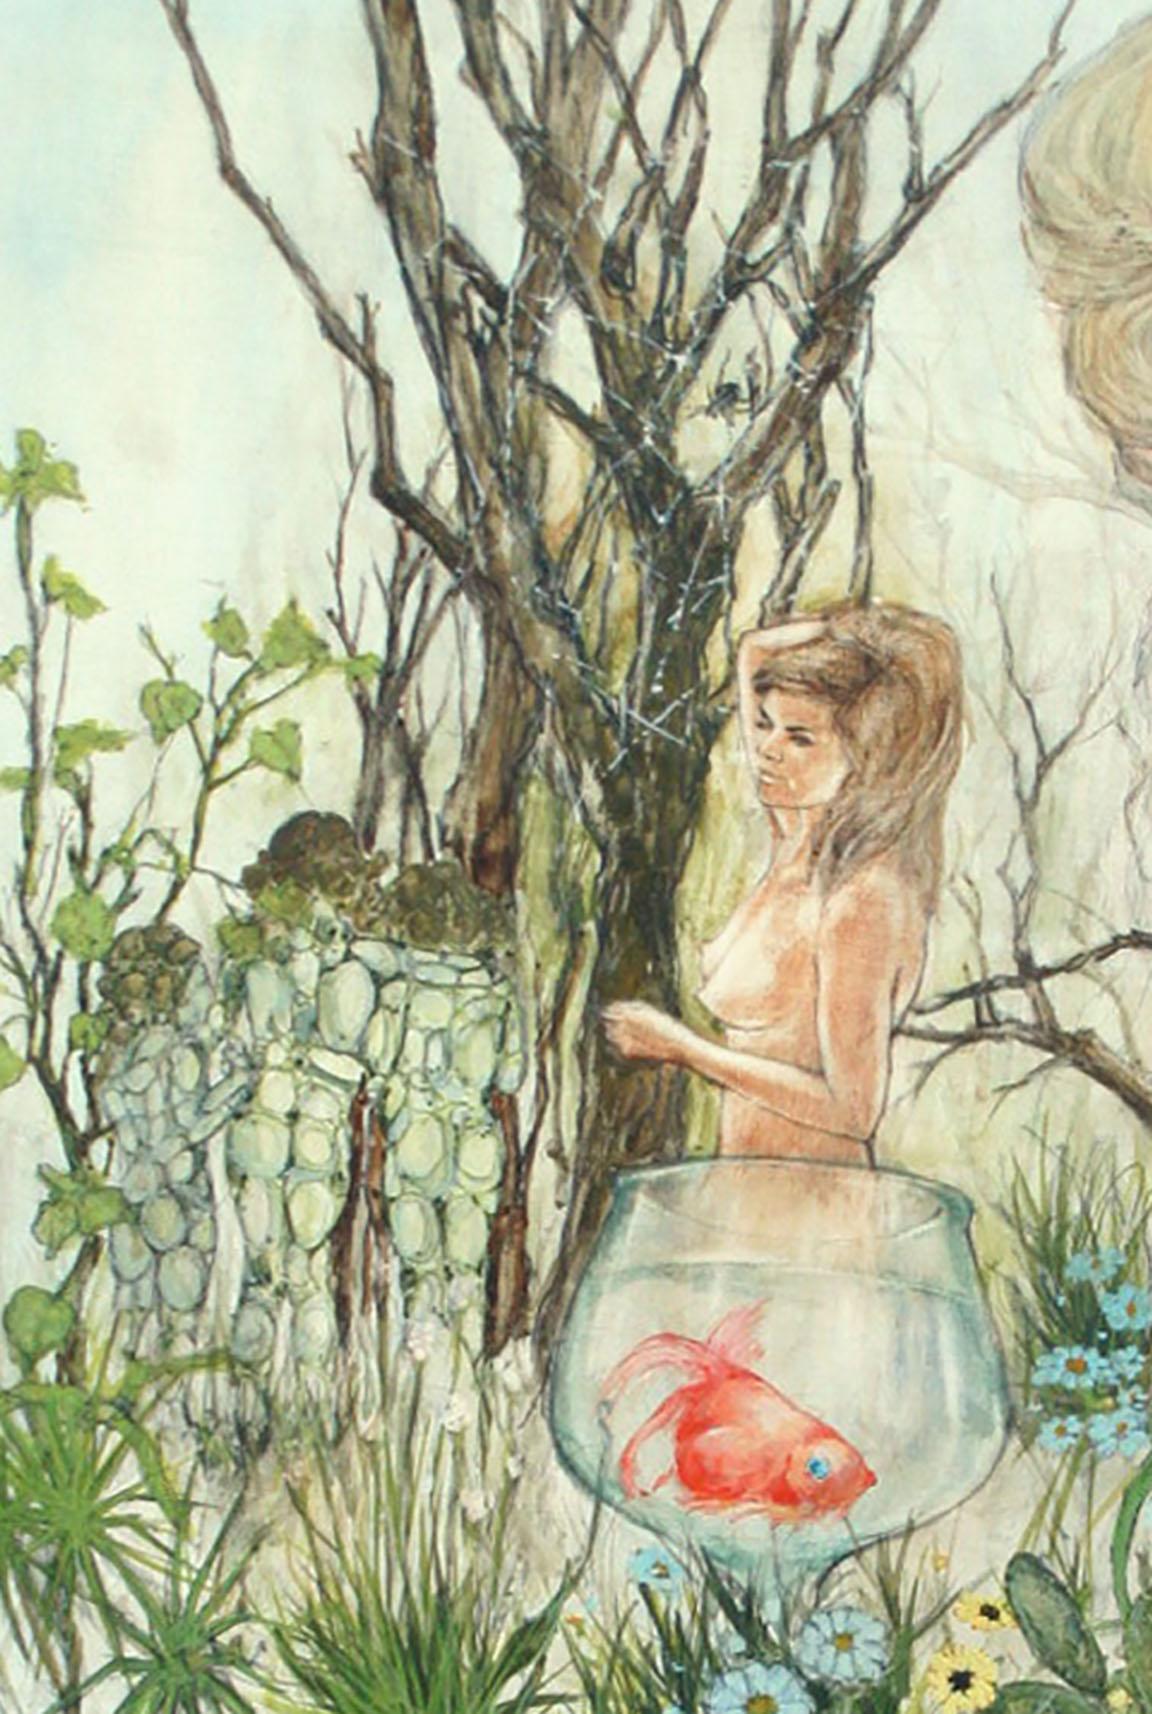 Unique and fantastical mid-century painting of a nude figure standing in front of a fish in the forest surrounded by flowers, plants, and a portrait by Kenneth Fong, 1969. Symbolic, naturalistic creatures reminiscent of Alice's Down the Rabbit Hole